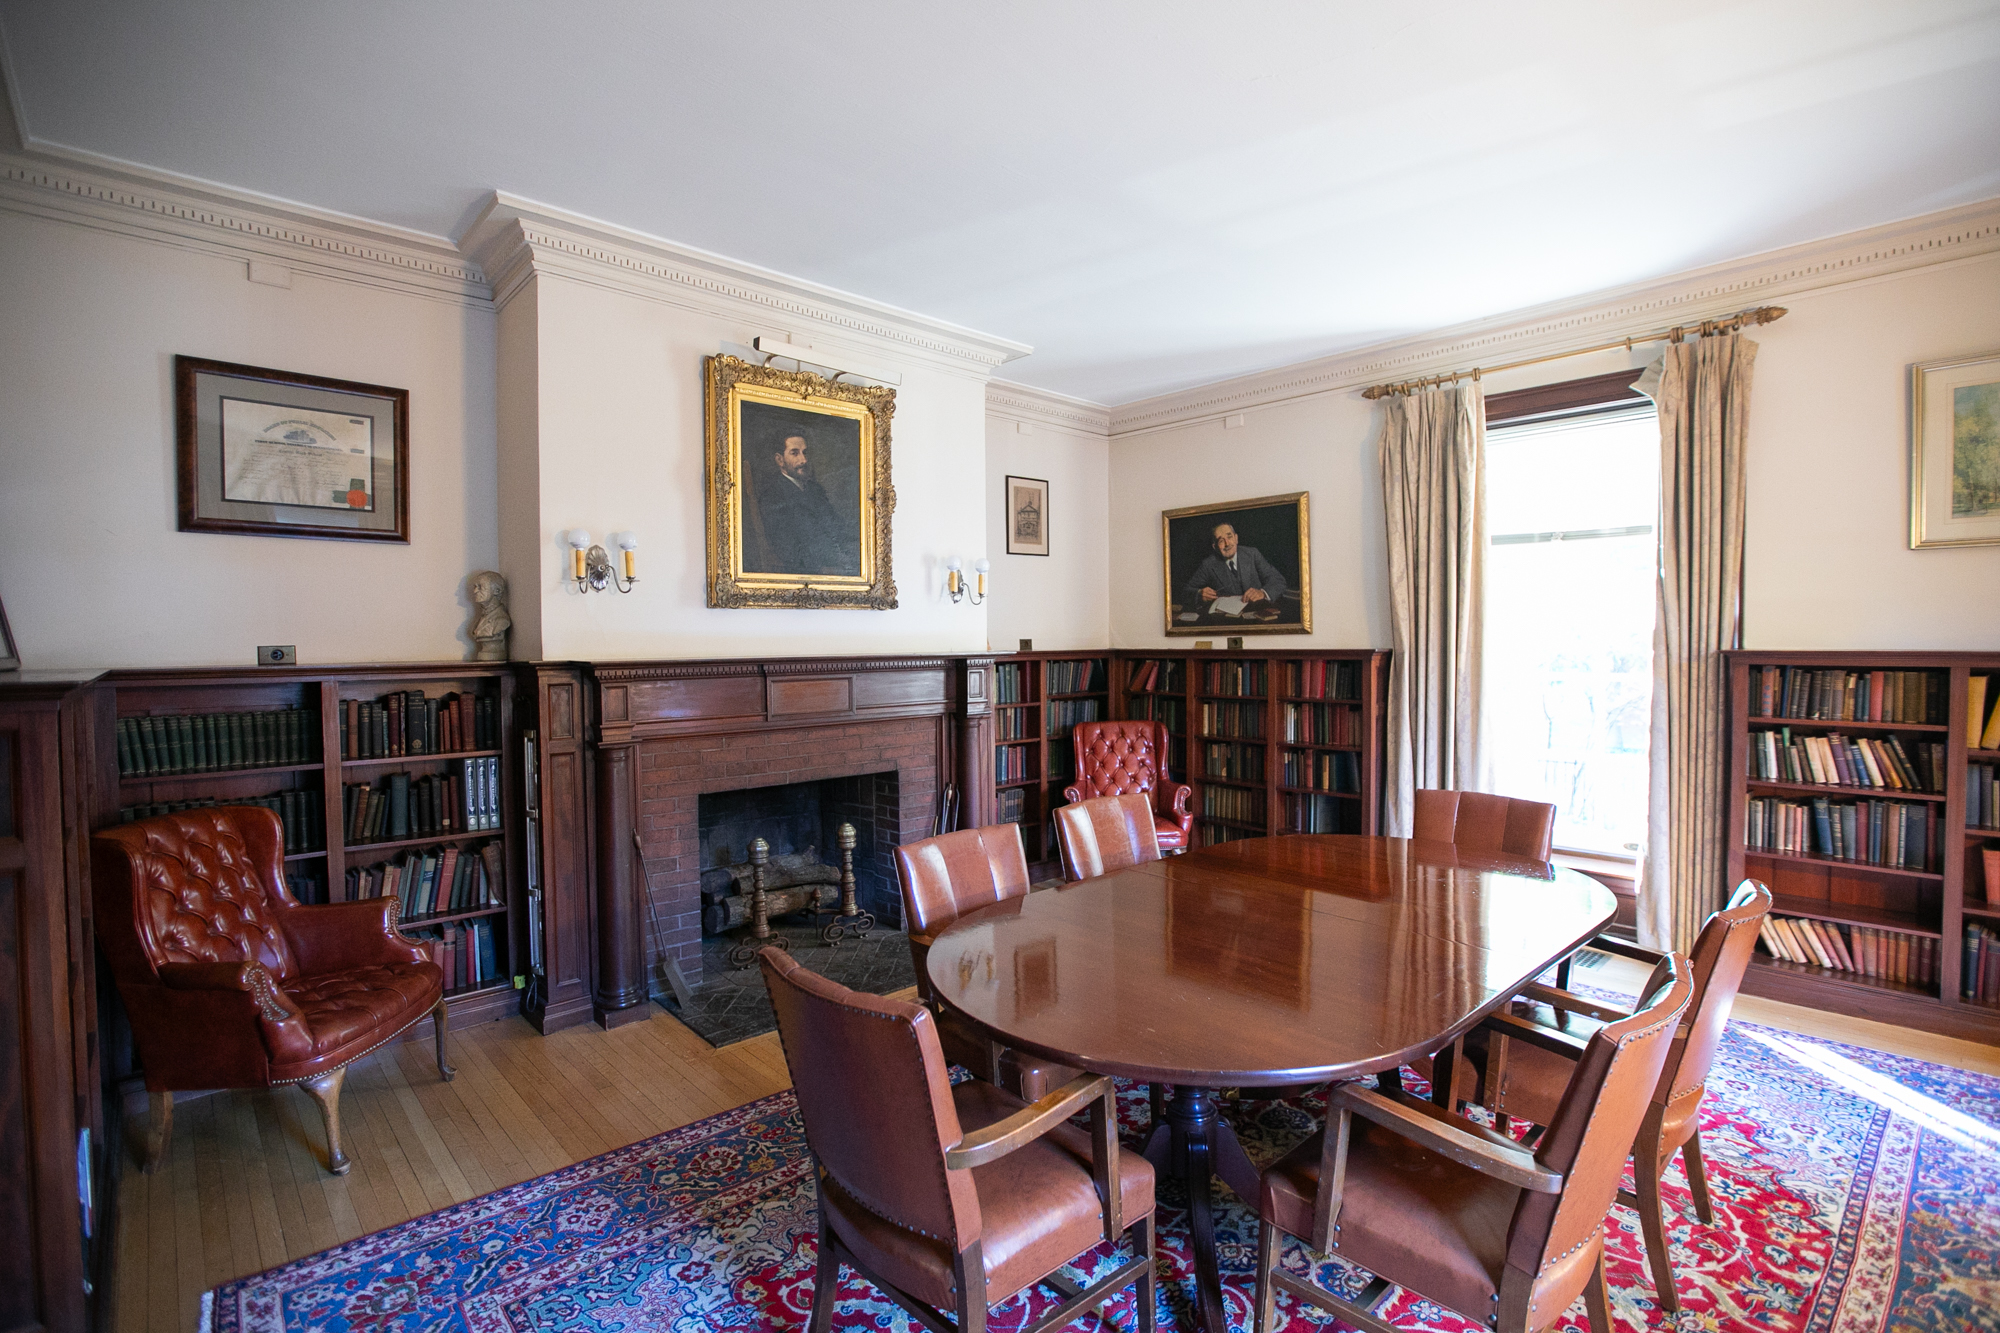 Interior of Fox-Fels Hall on Penn Campus, with wooden inlaid fireplace and low bookshelves, wooden dining table and oil paintings of people's portraits on the walls.